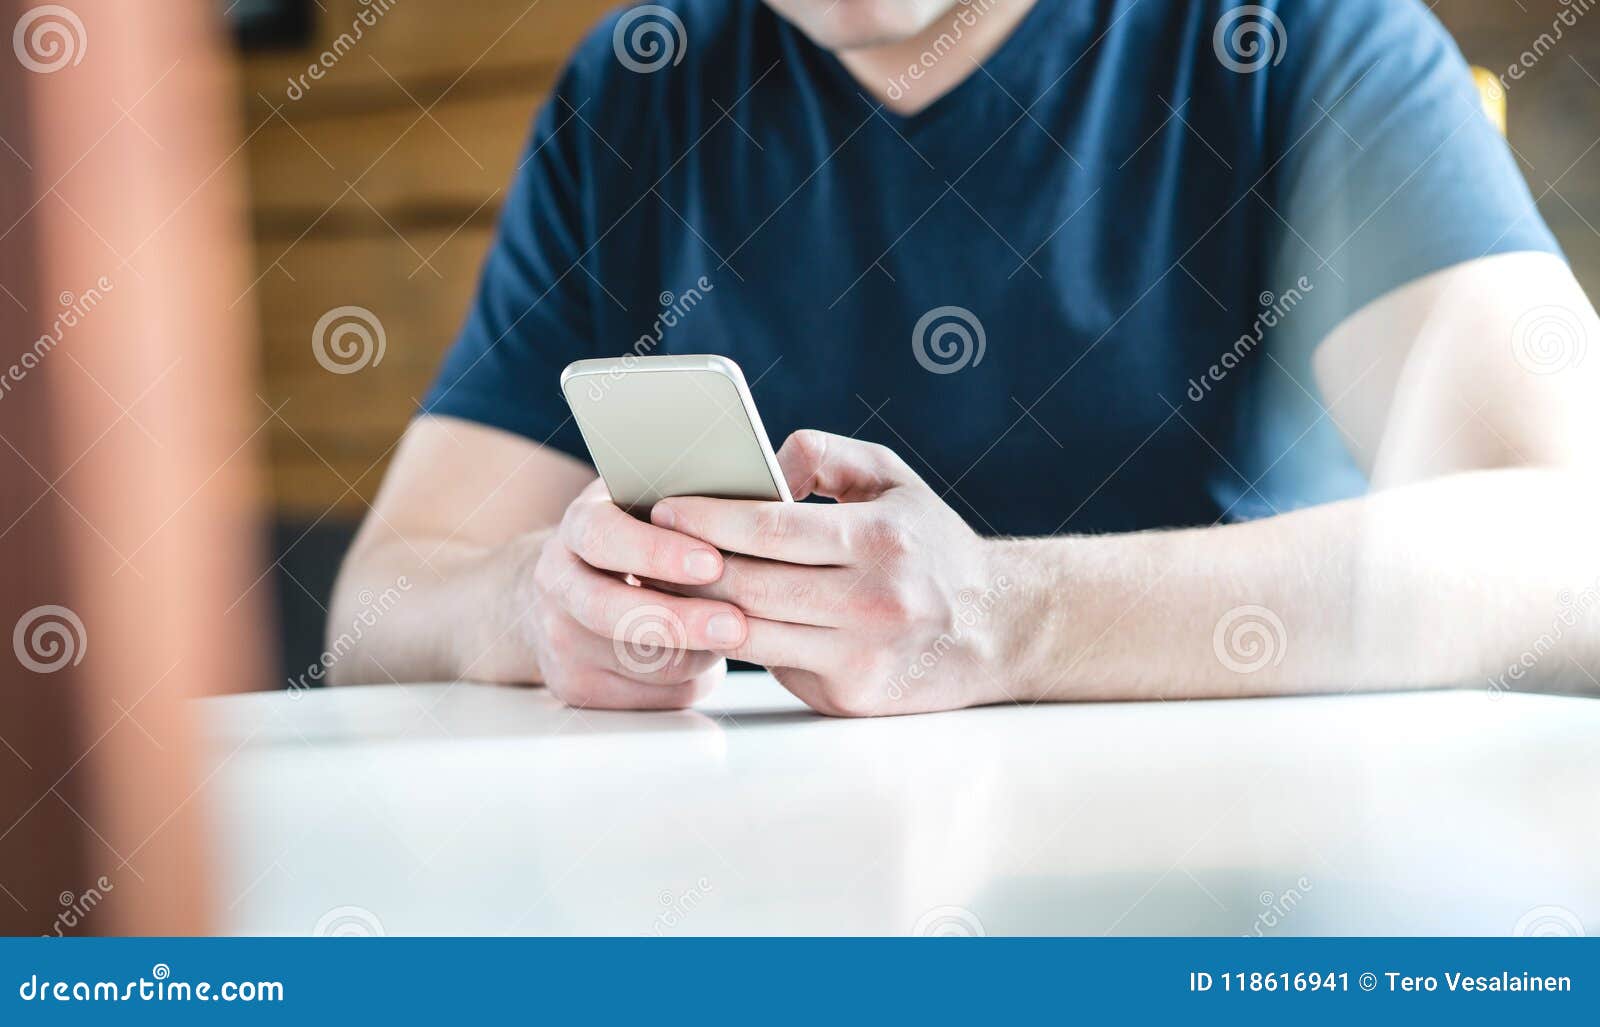 young man texting with smartphone. guy using mobile phone.